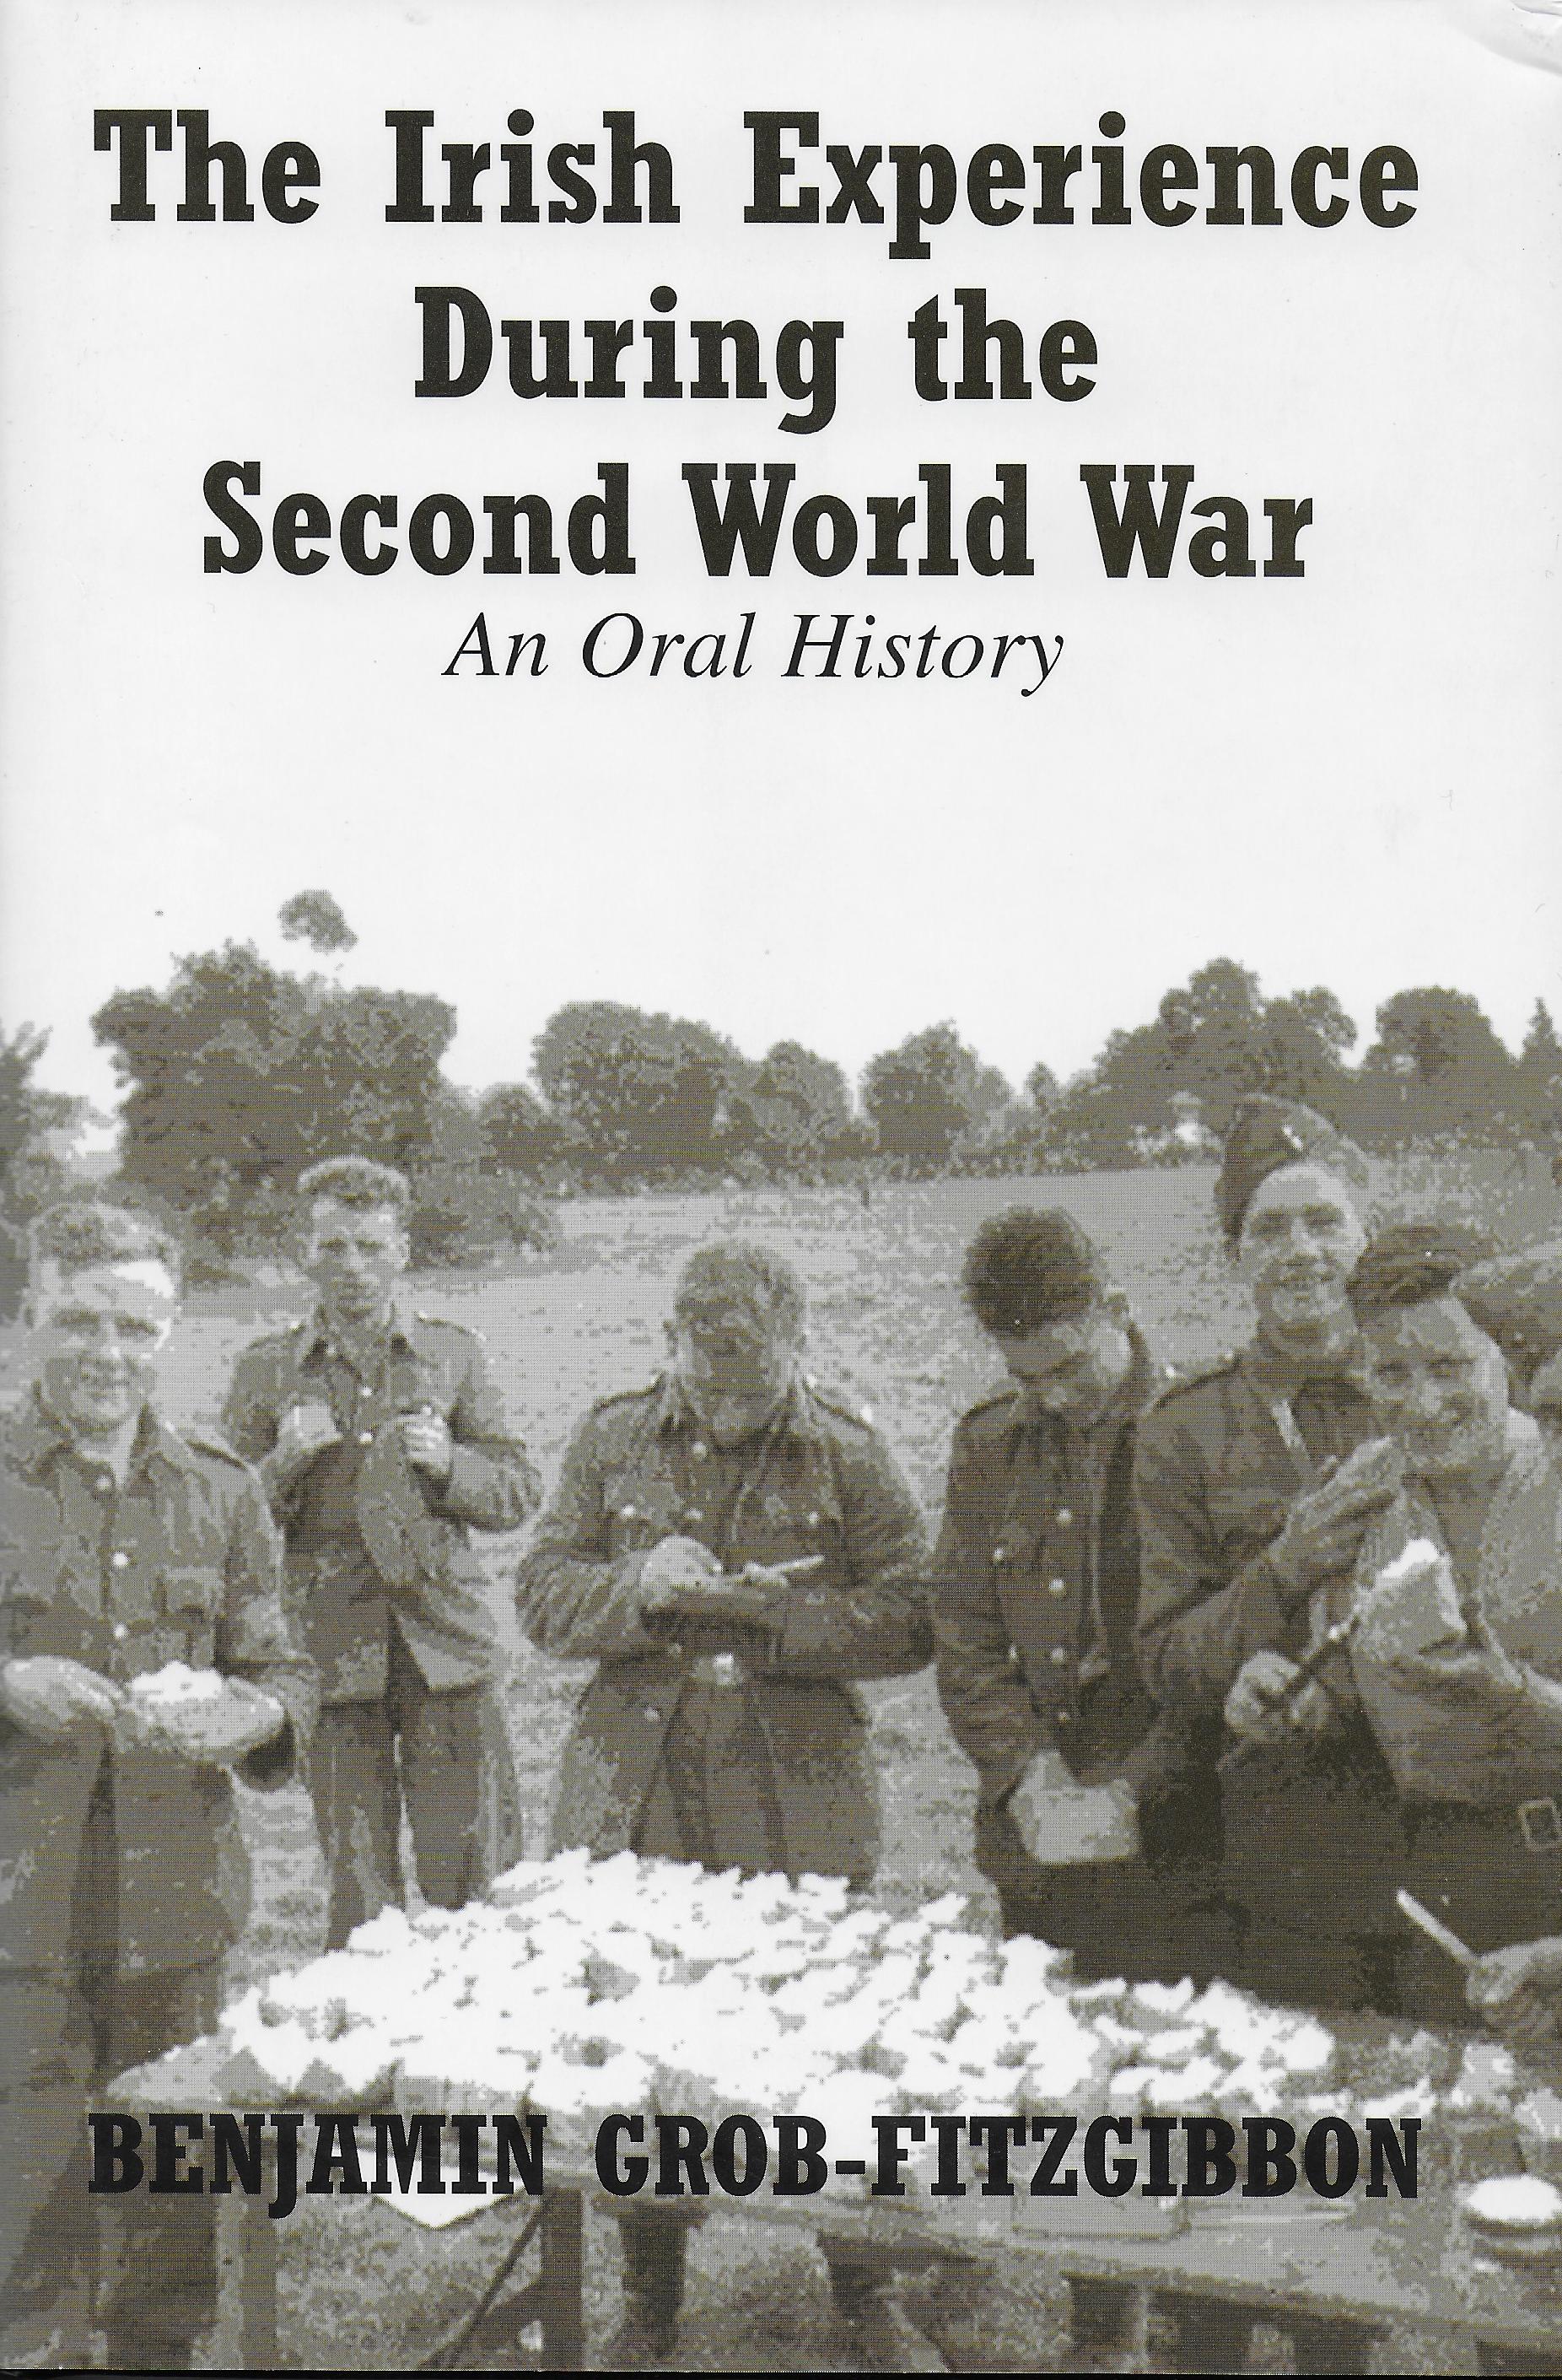 The Irish Experience During the Second World War: An Oral History (Hardback)